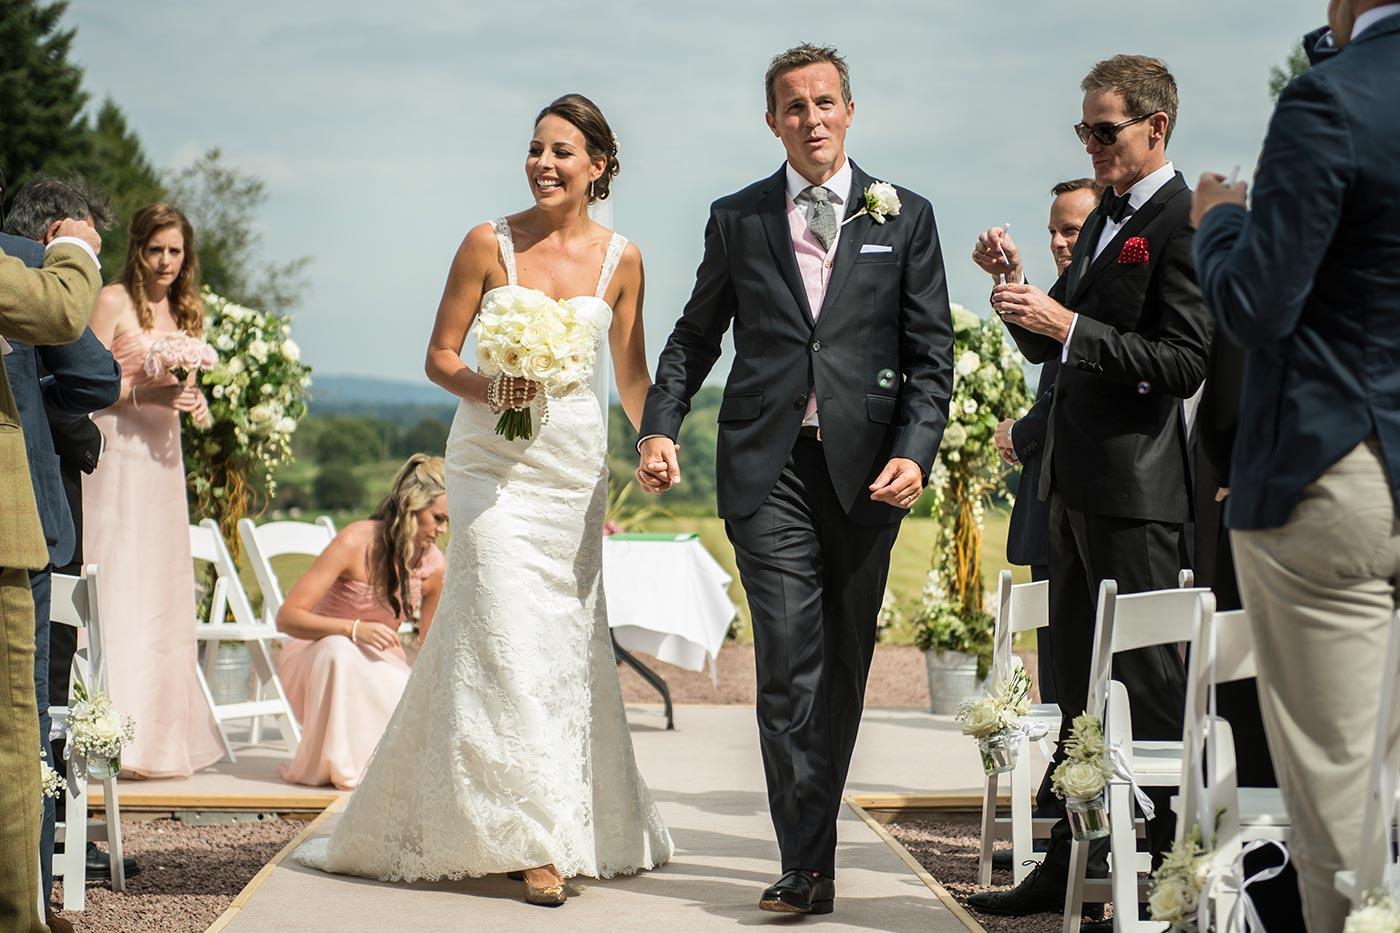 Couple walking down their aisle during their outdoor wedding ceremony at Chateau de la Cazine